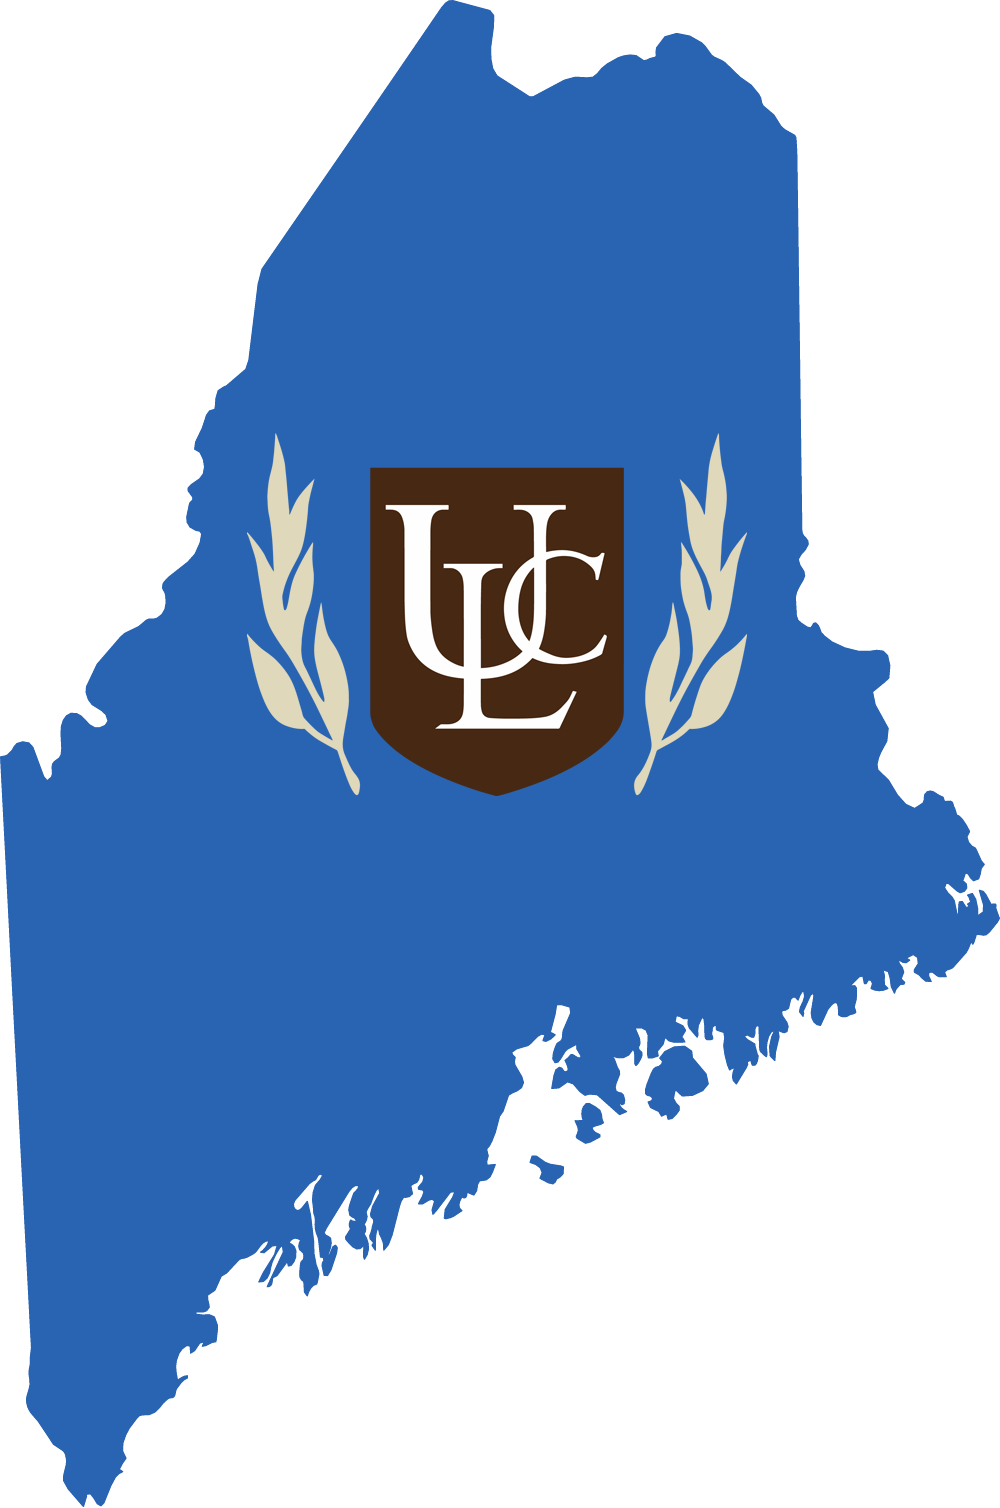 An outline of Maine with the ULC logo